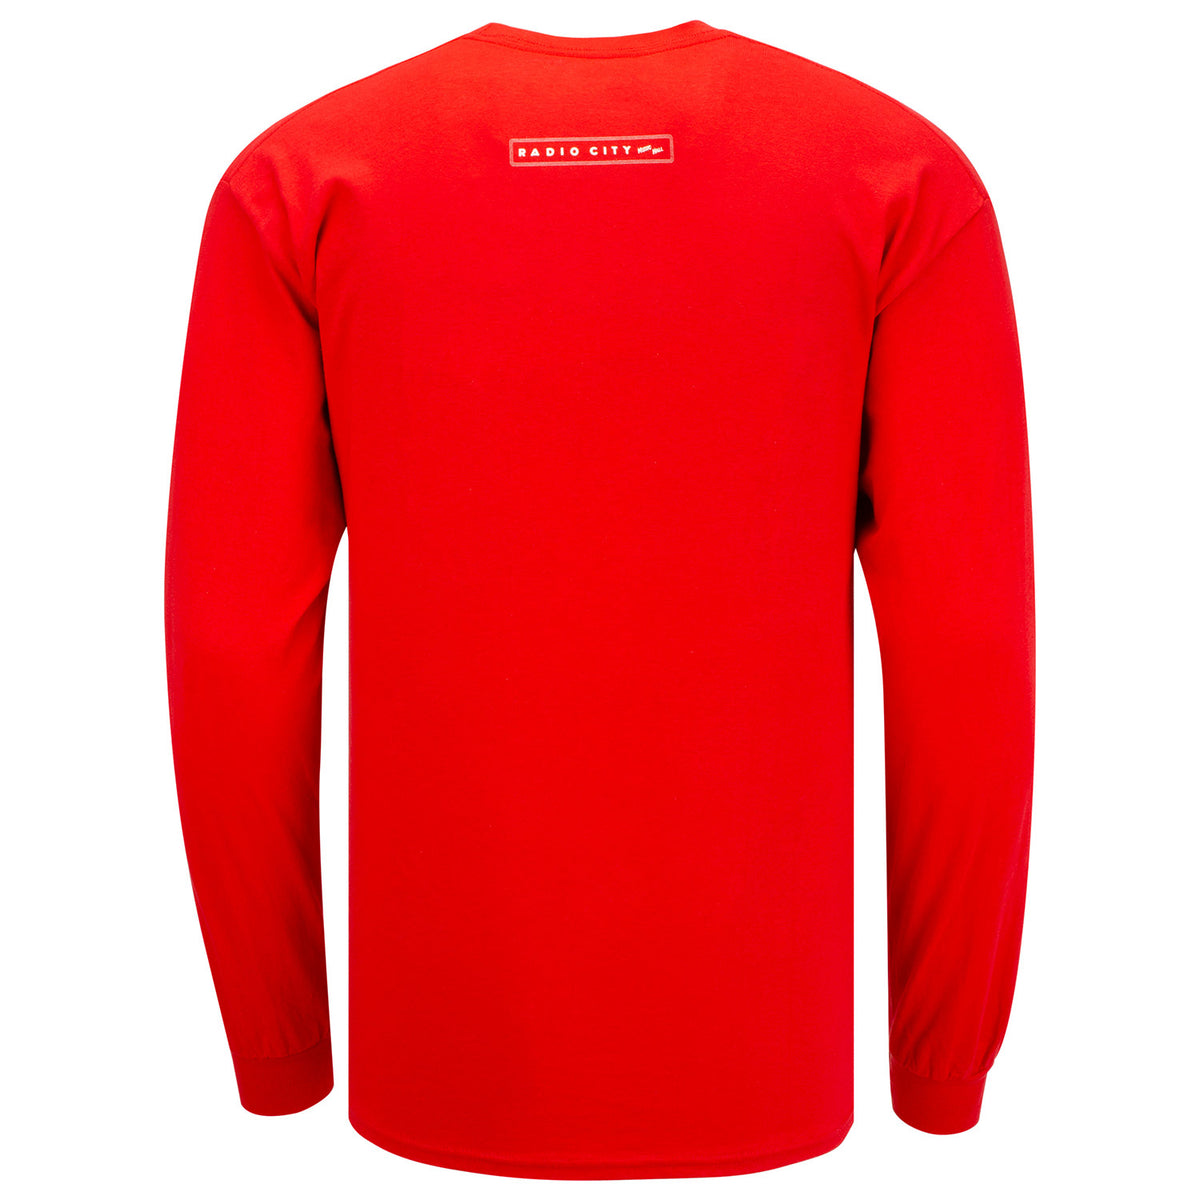 Parade of the Wooden Soldiers Long Sleeve Shirt In Red - Back View